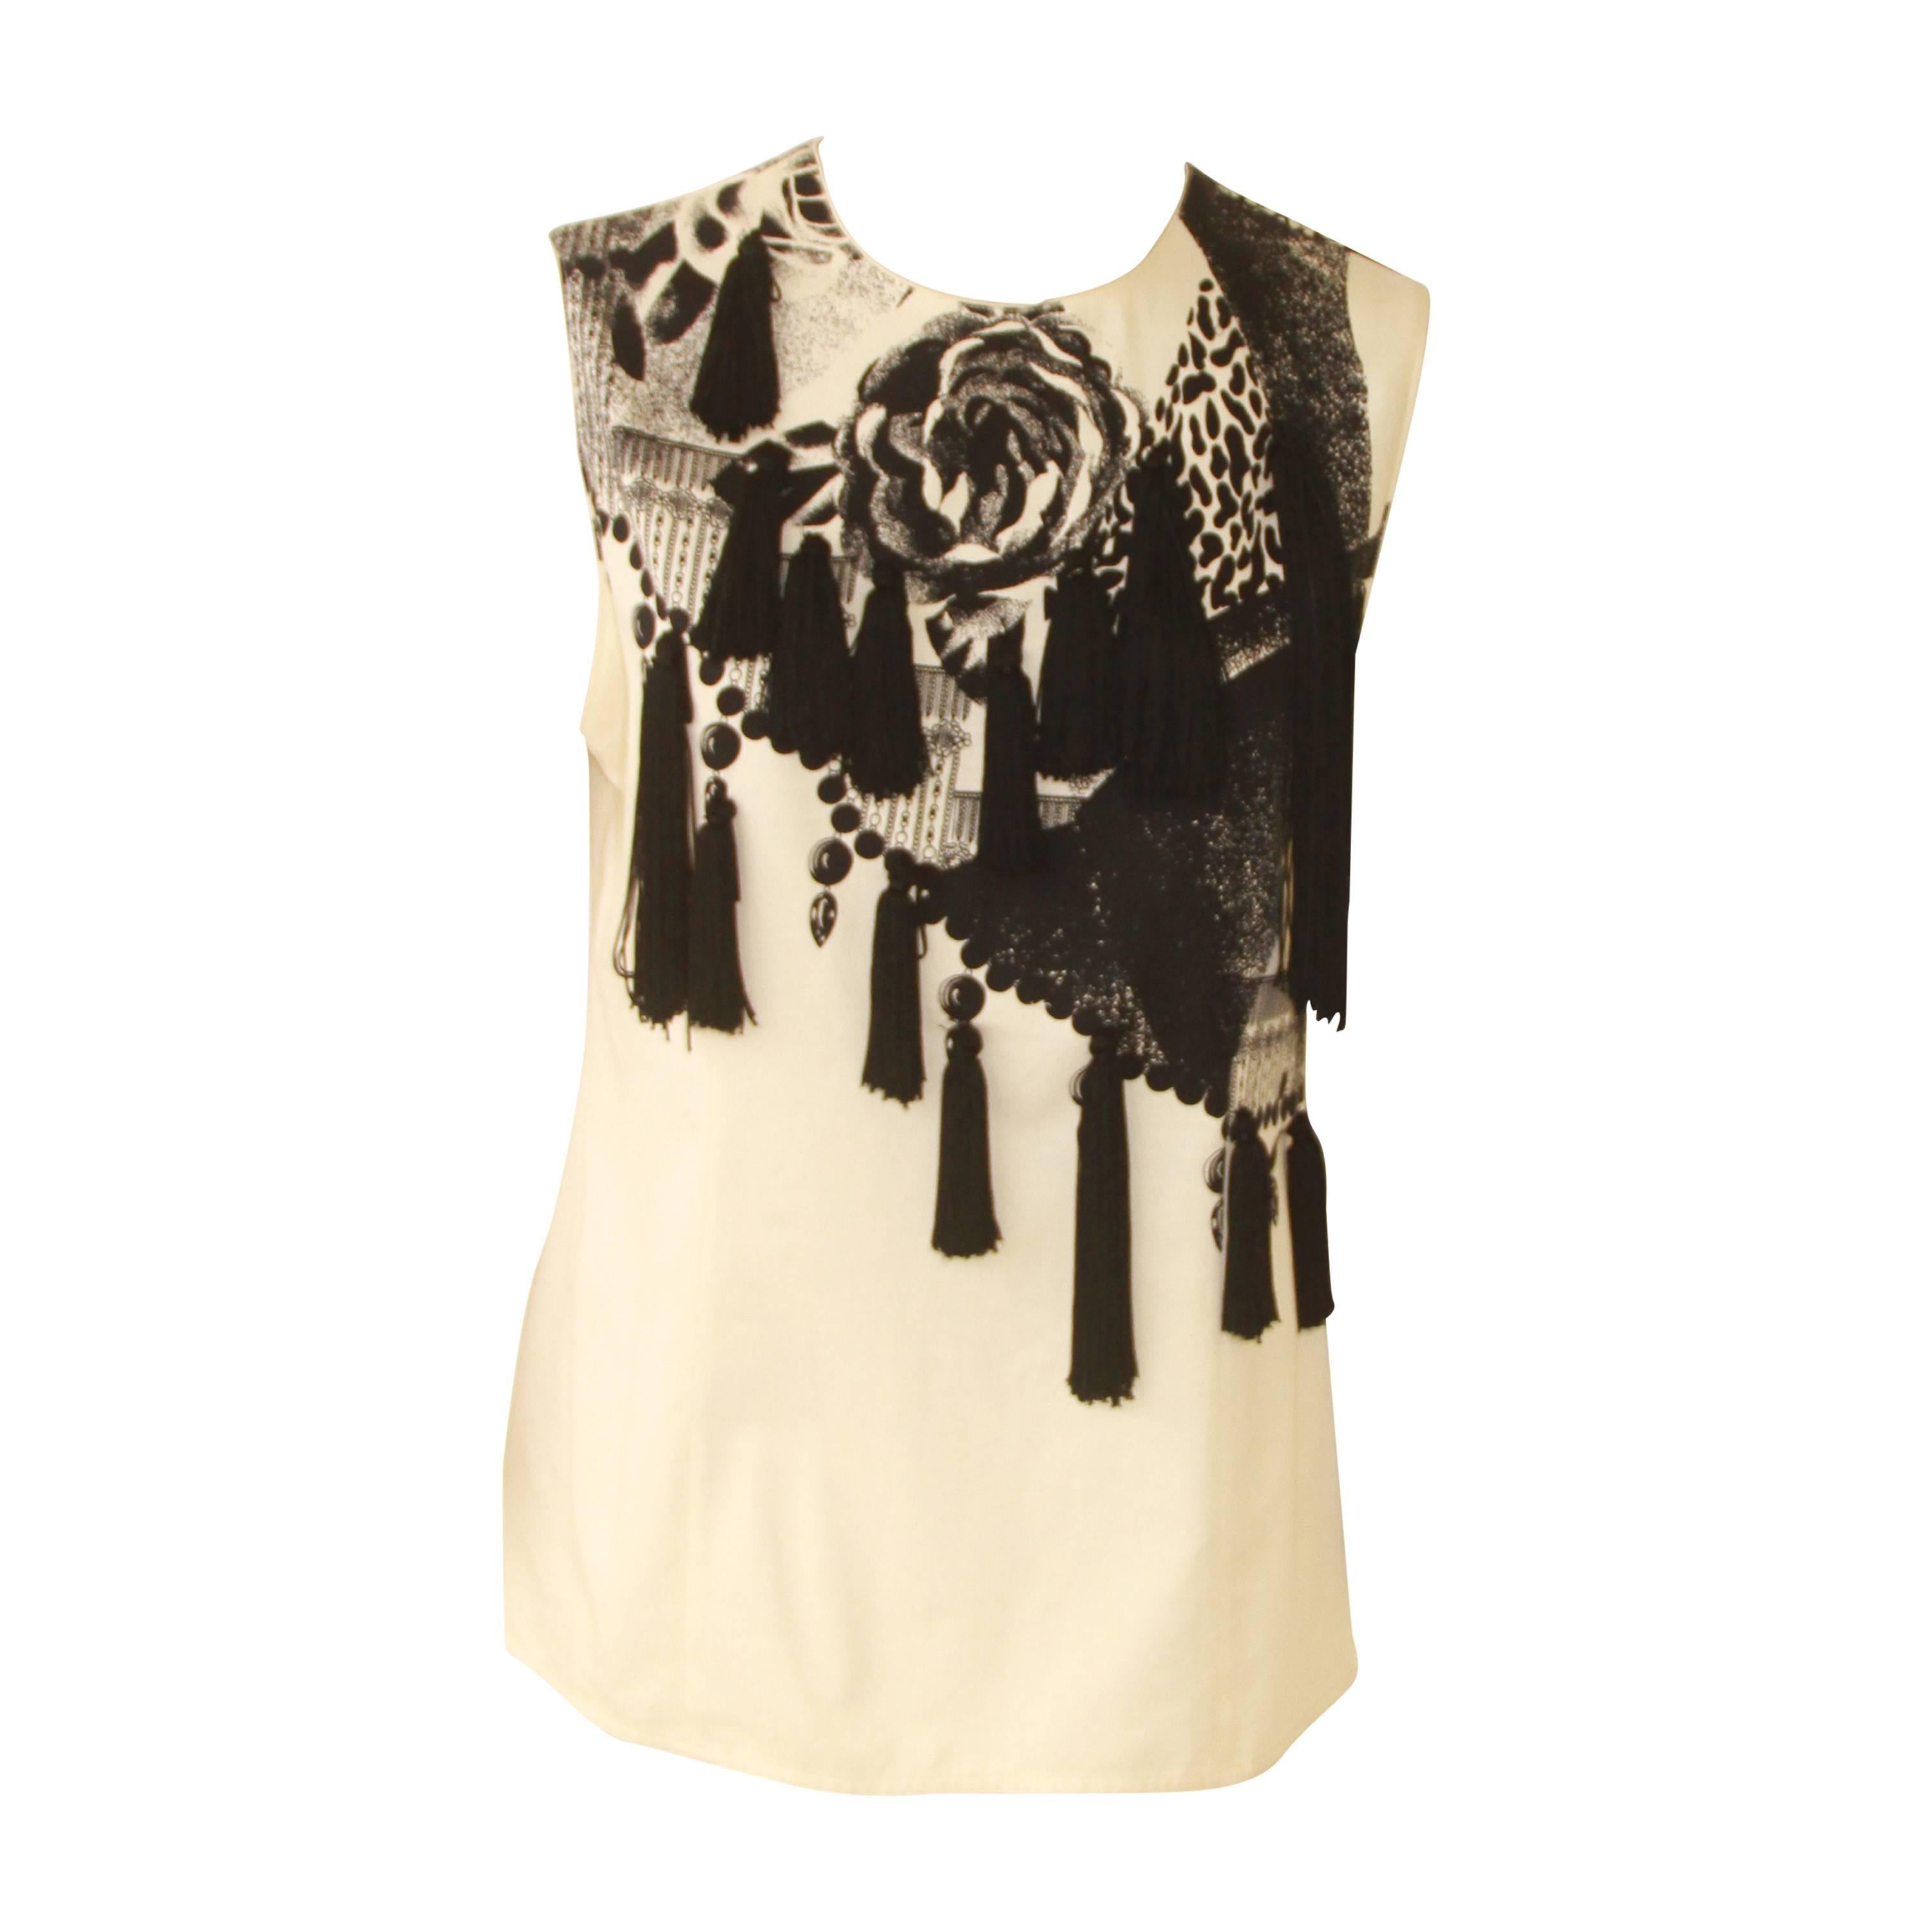 Gianni Versace Printed Cotton Top With Tassels Spring 1990 For Sale